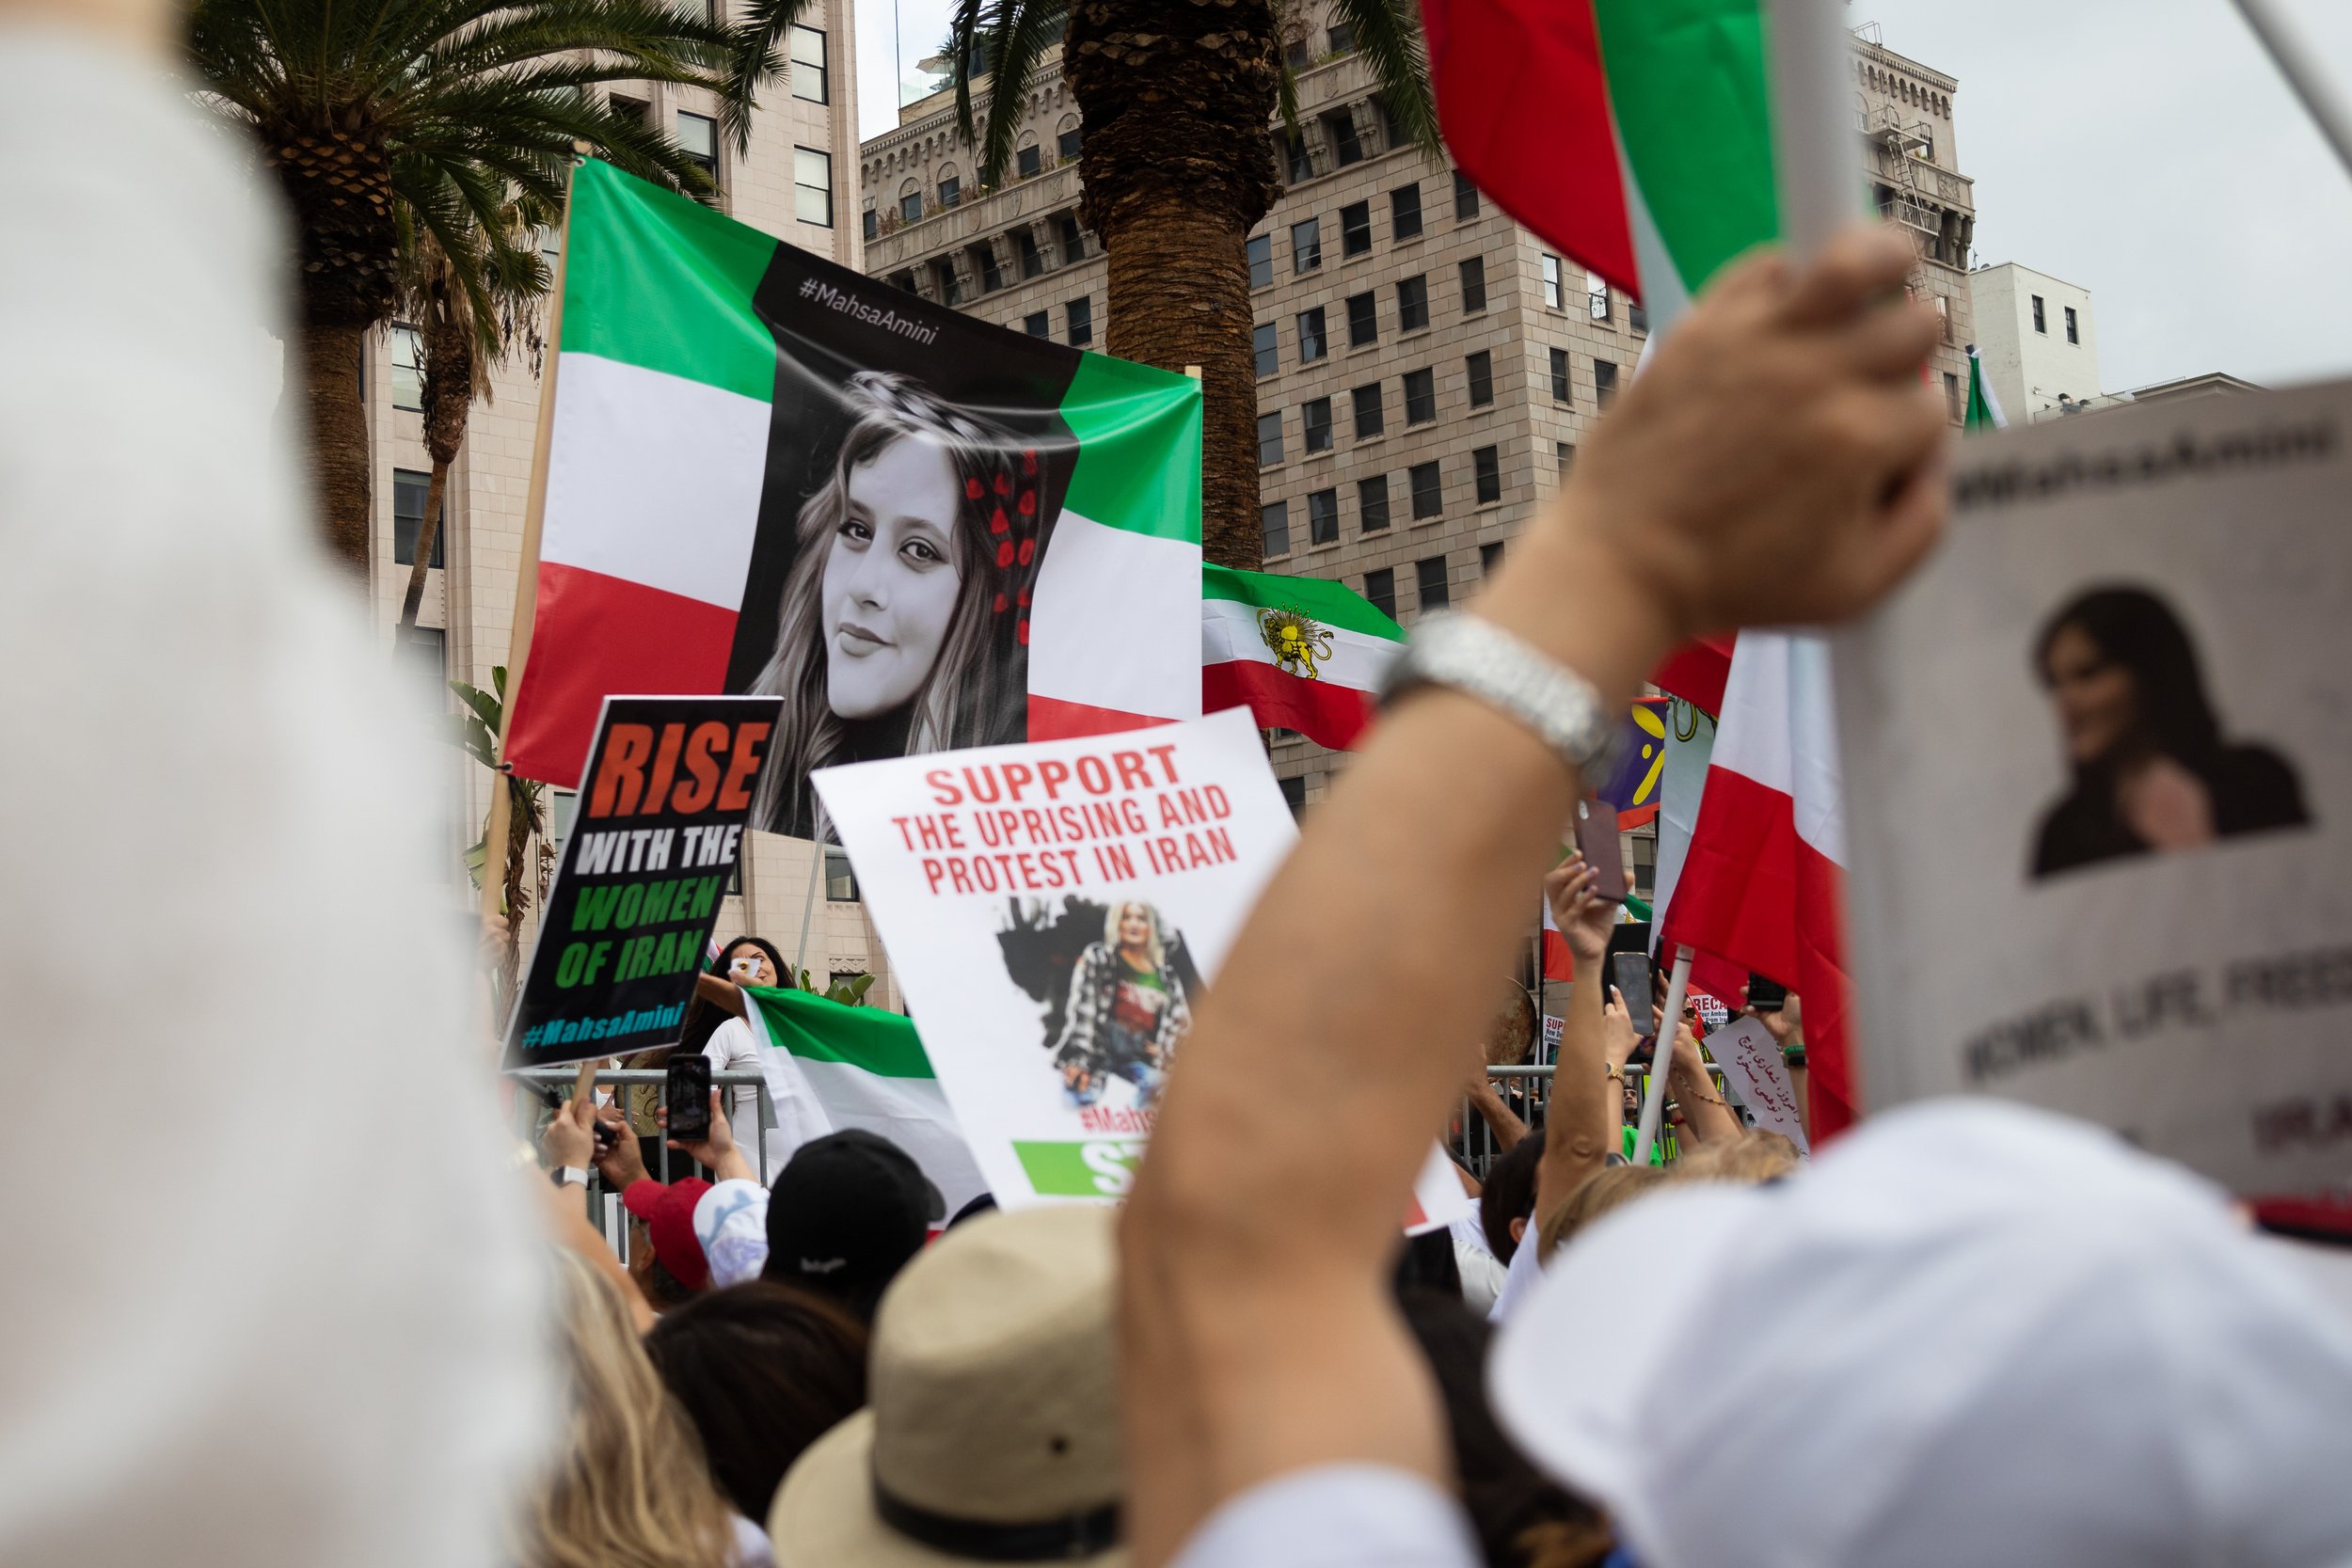  Rally goers holding a banner with a picture of Mahsa Amini during the fourth Freedom for Iran protest to take place in the Los Angeles area. These protests are part of a global movement calling for regime change in Iran over the death of Mahsa Amini